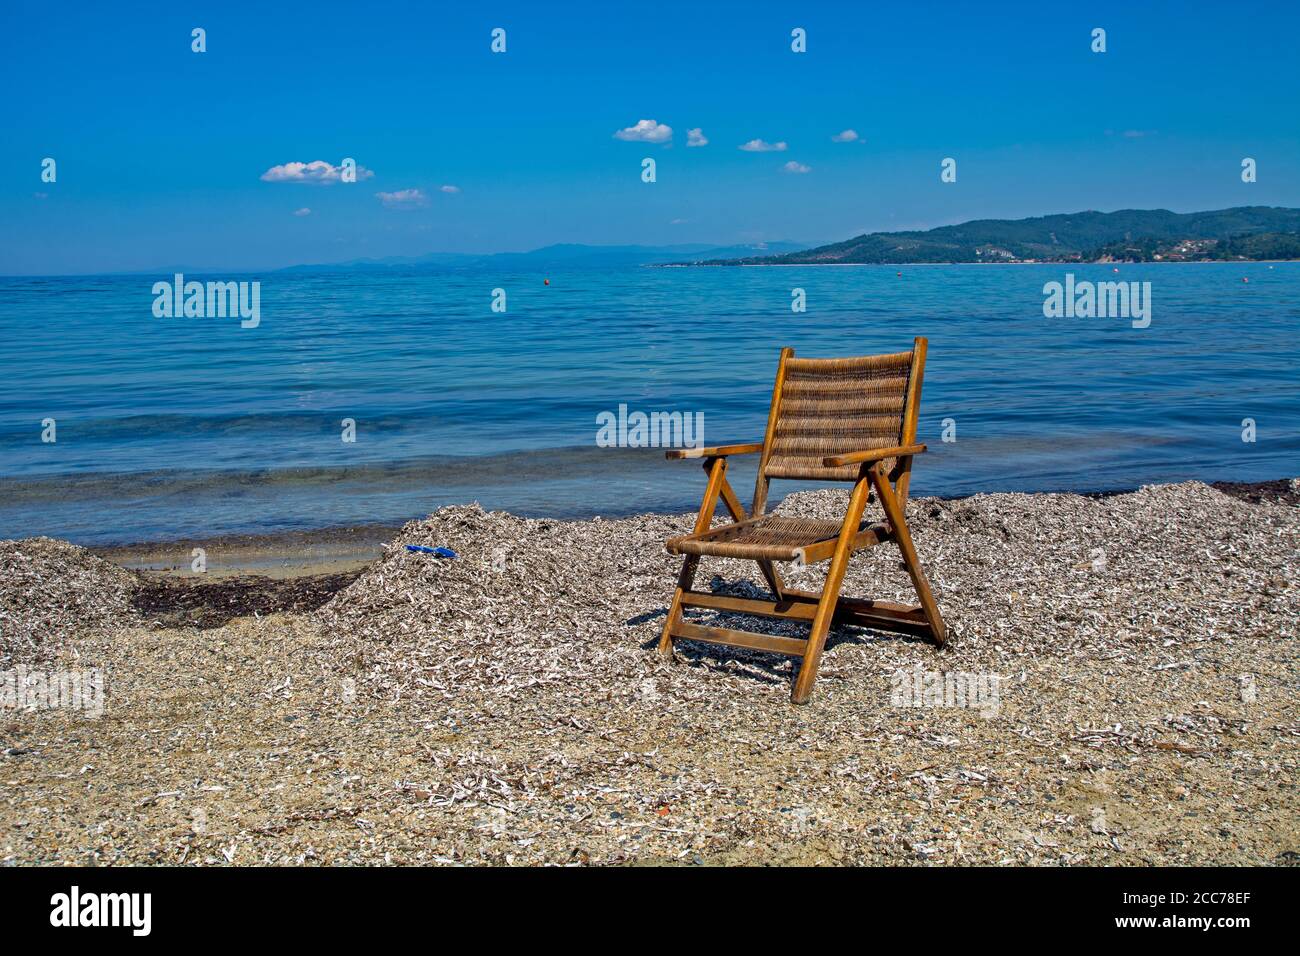 Good old wooden summer chair on the beach in Greece. The chair is a symbol of enjoyment and relaxation by the sea. Stock Photo